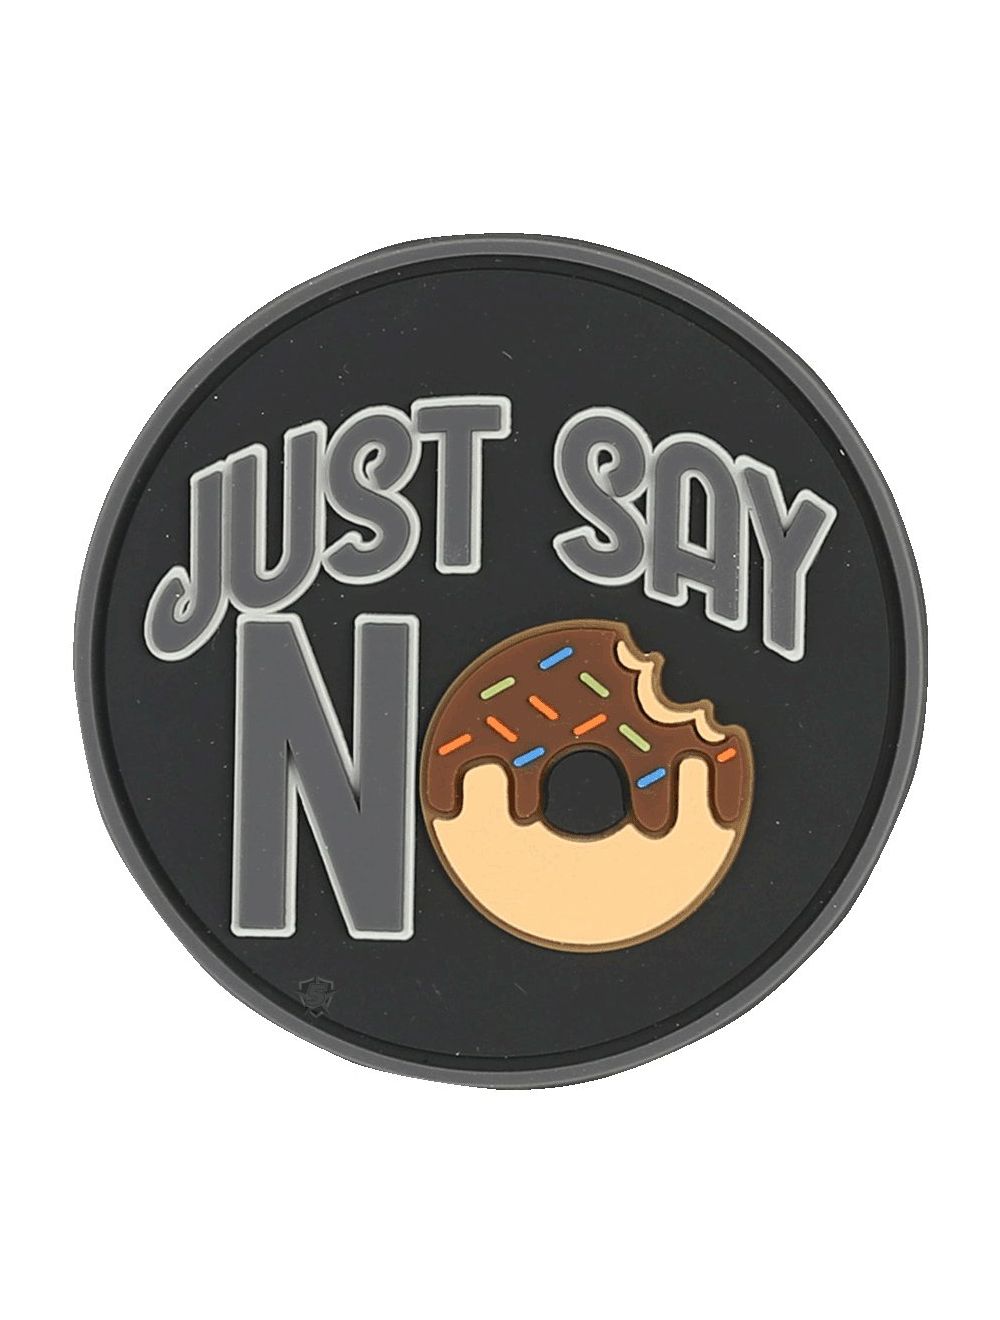 Just Say No Morale Patch